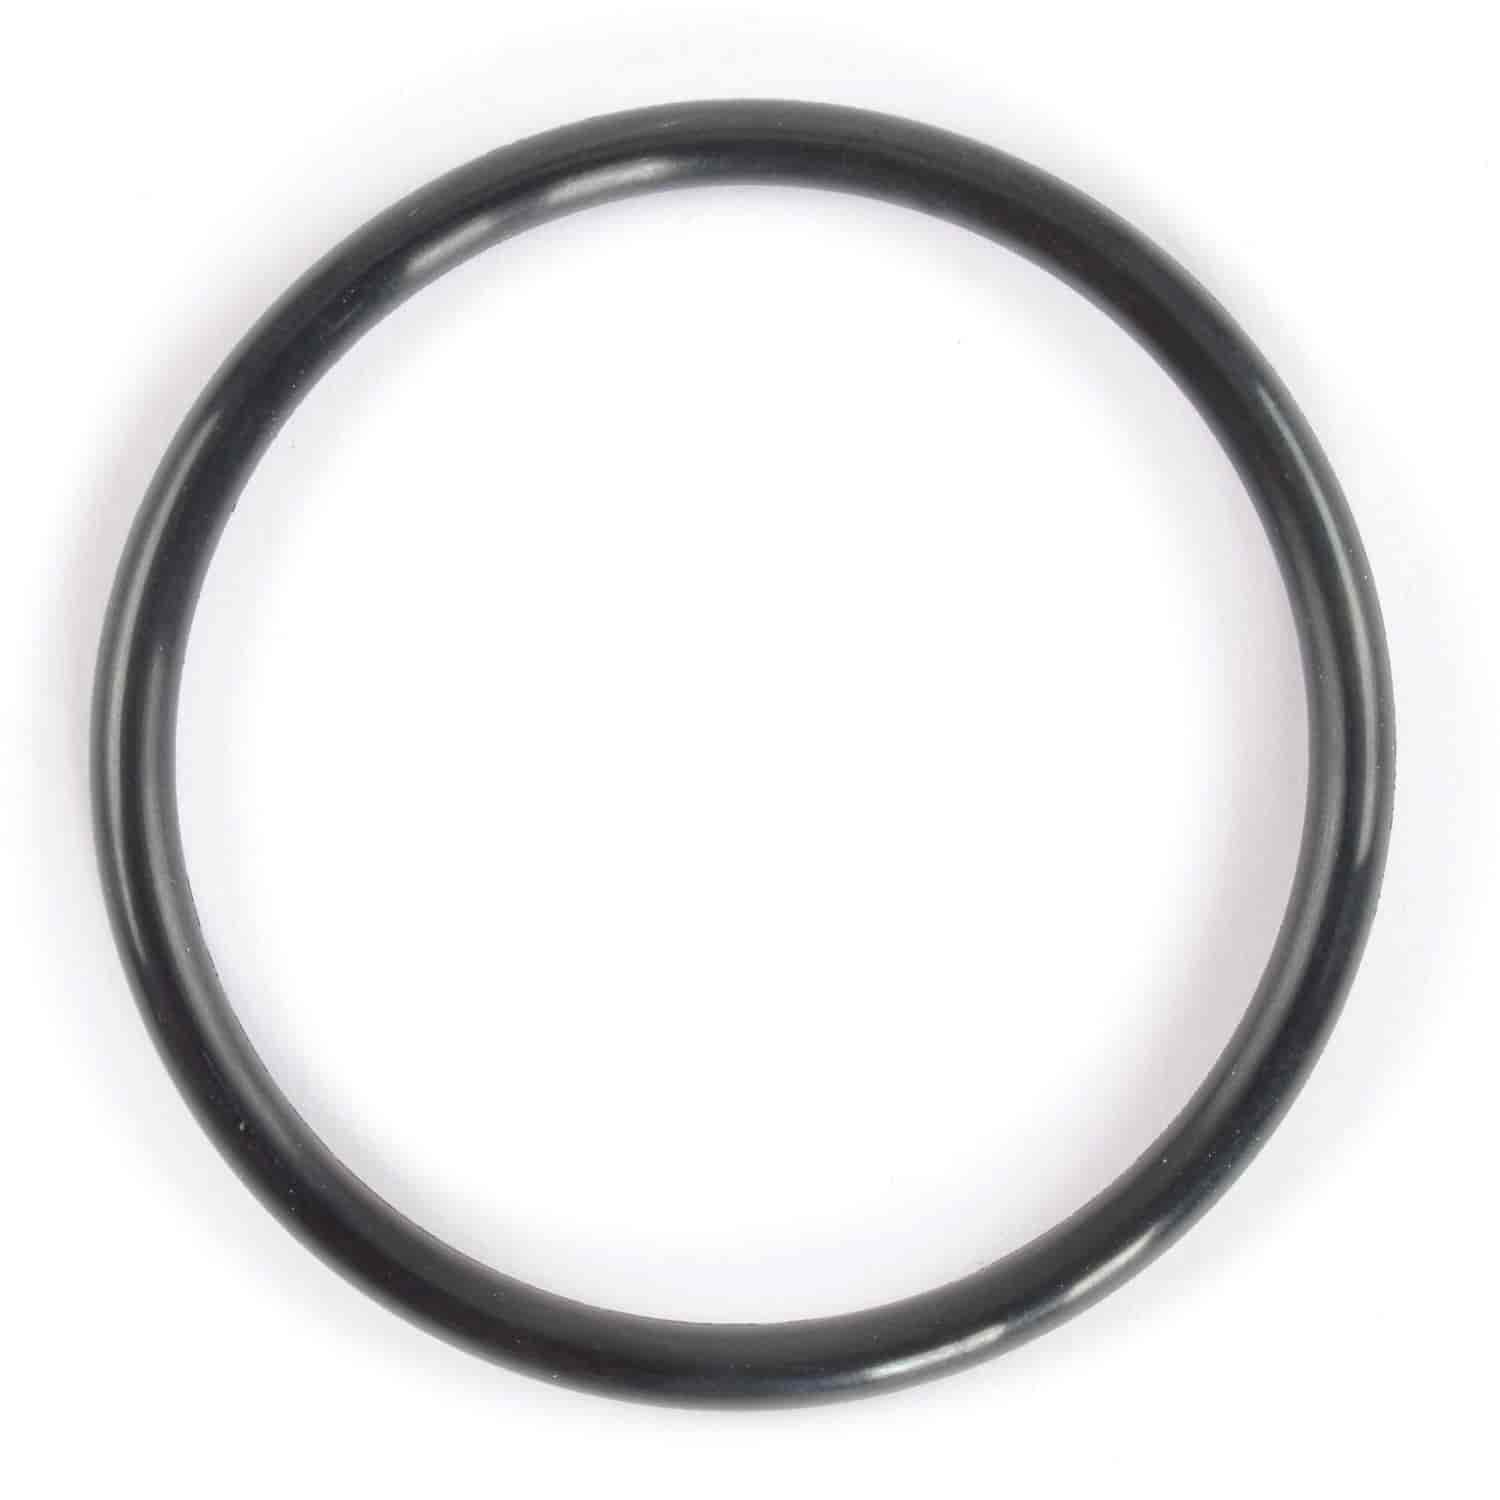 Replacement Utility Jug O-Ring